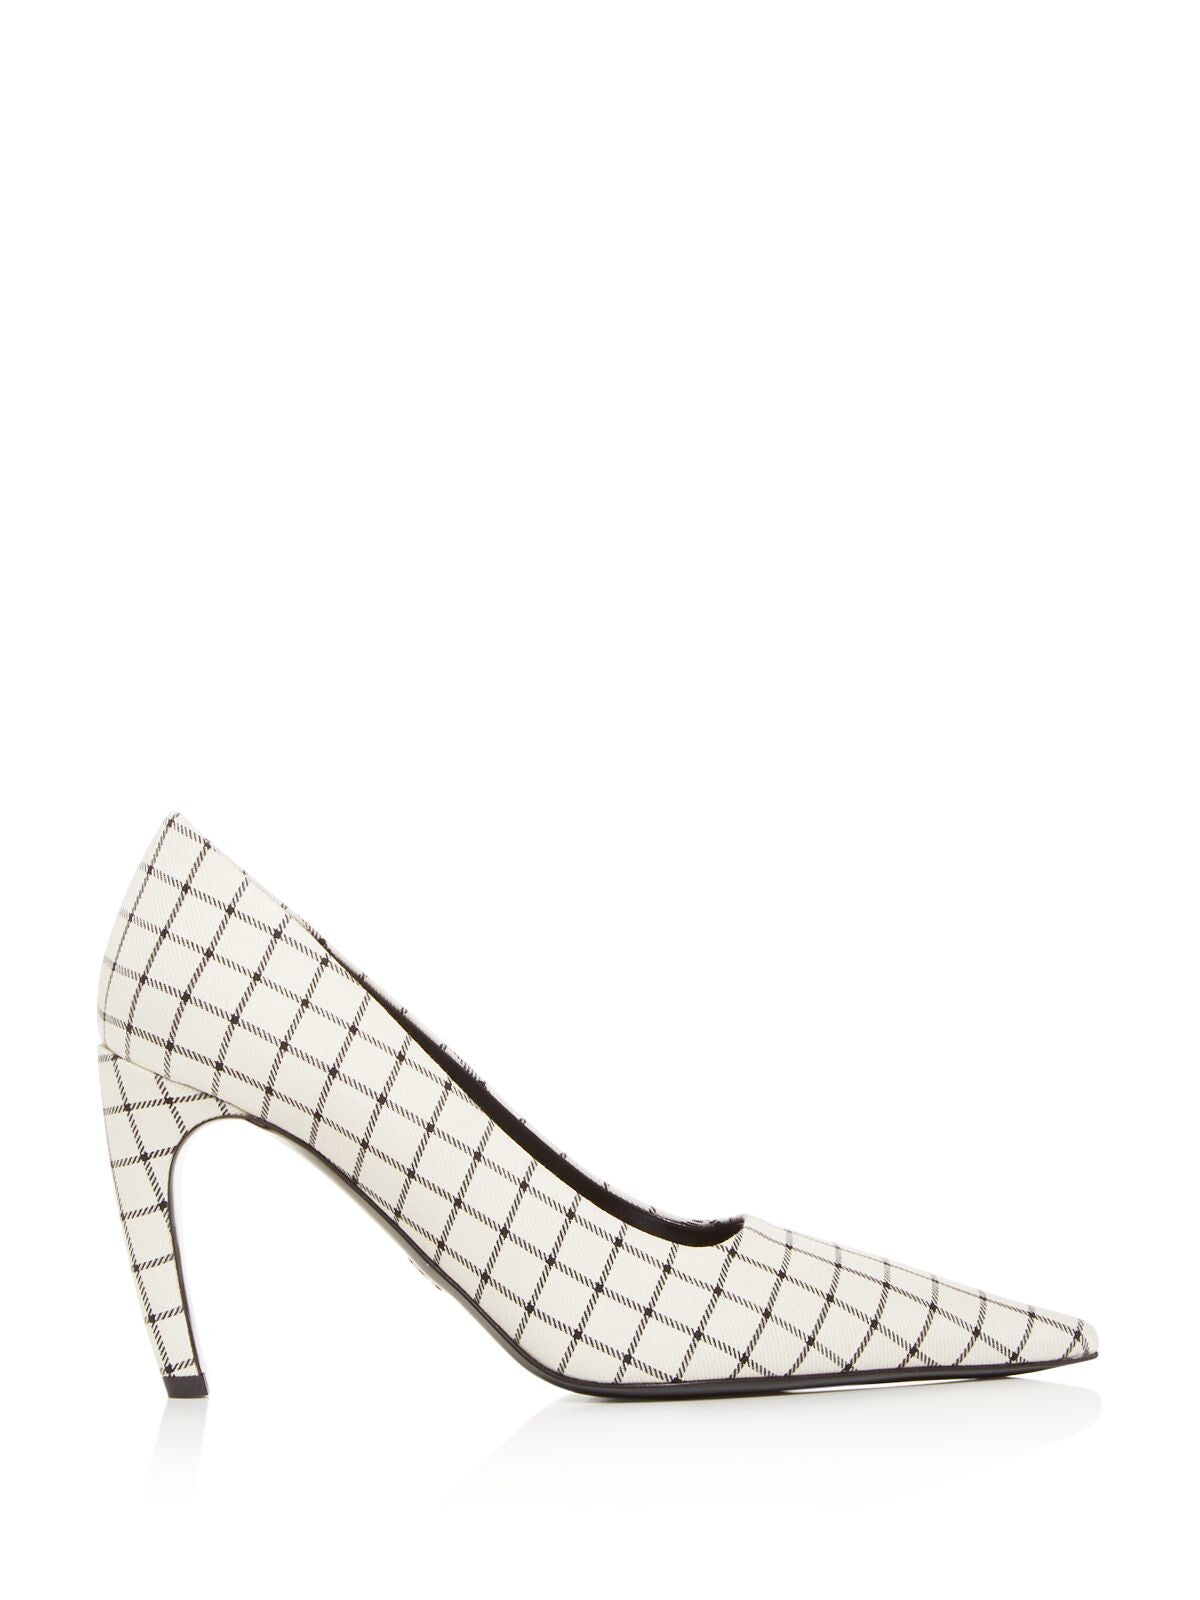 PROENZA SCHOULER Womens Beige Windowpane Curved Heel Padded Pointed Toe Slip On Leather Dress Pumps Shoes